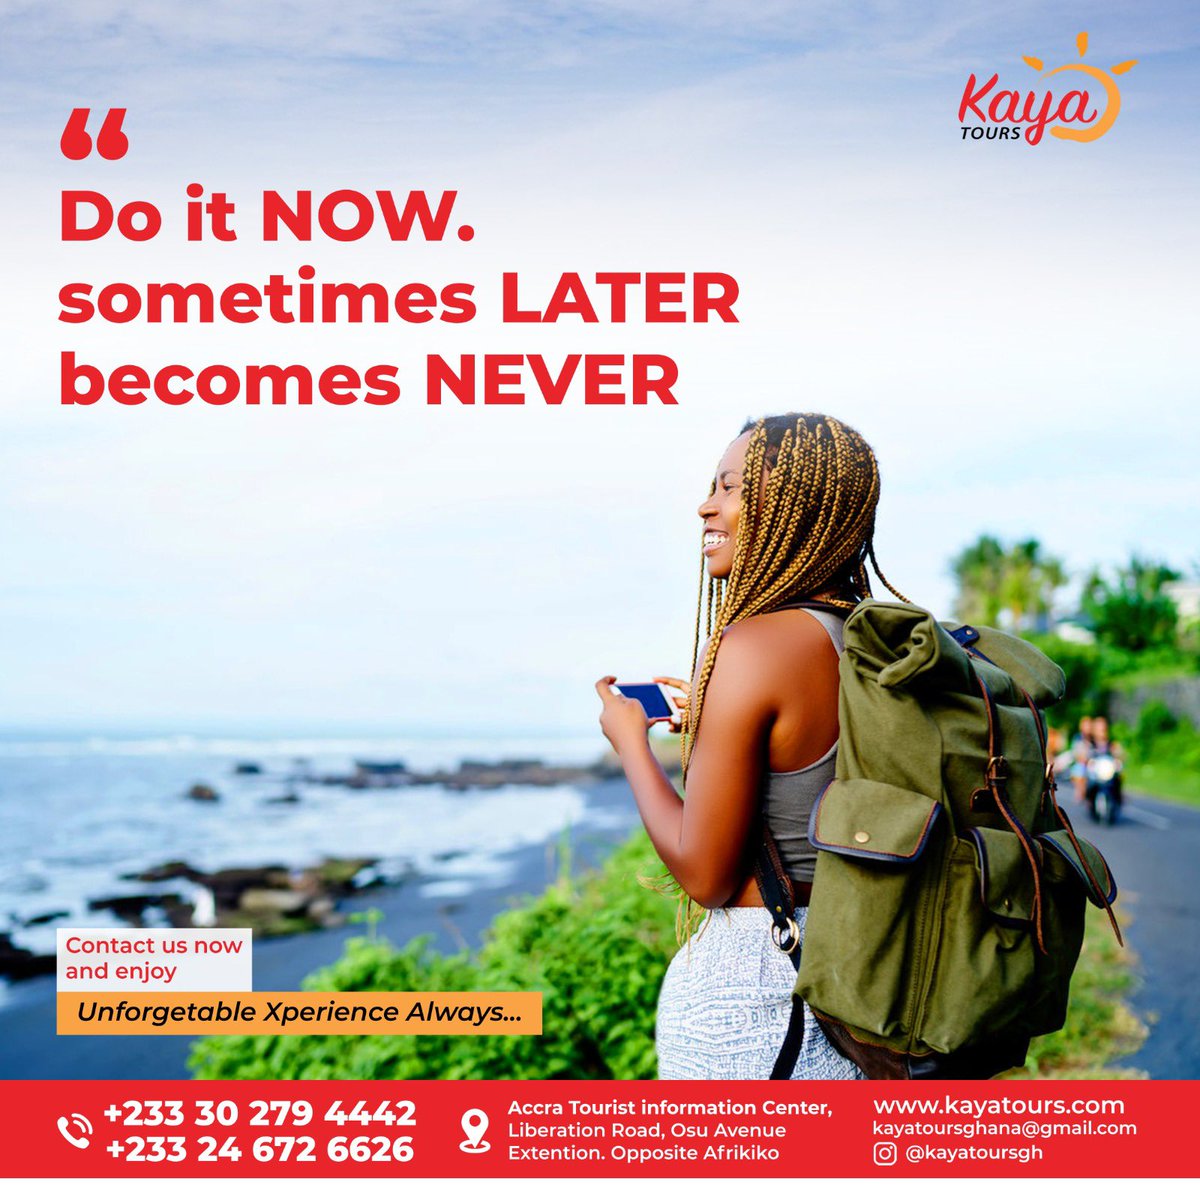 'Do it NOW, sometimes LATER becomes NEVER' #KayaTours #MondayQuote 

Challenge yourself to step out of your comfort zone and embrace new experiences.
Growth happens when we push ourselves beyond what we think we're capable of.

Kaya Tours …  Always Unforgettable Xperiences